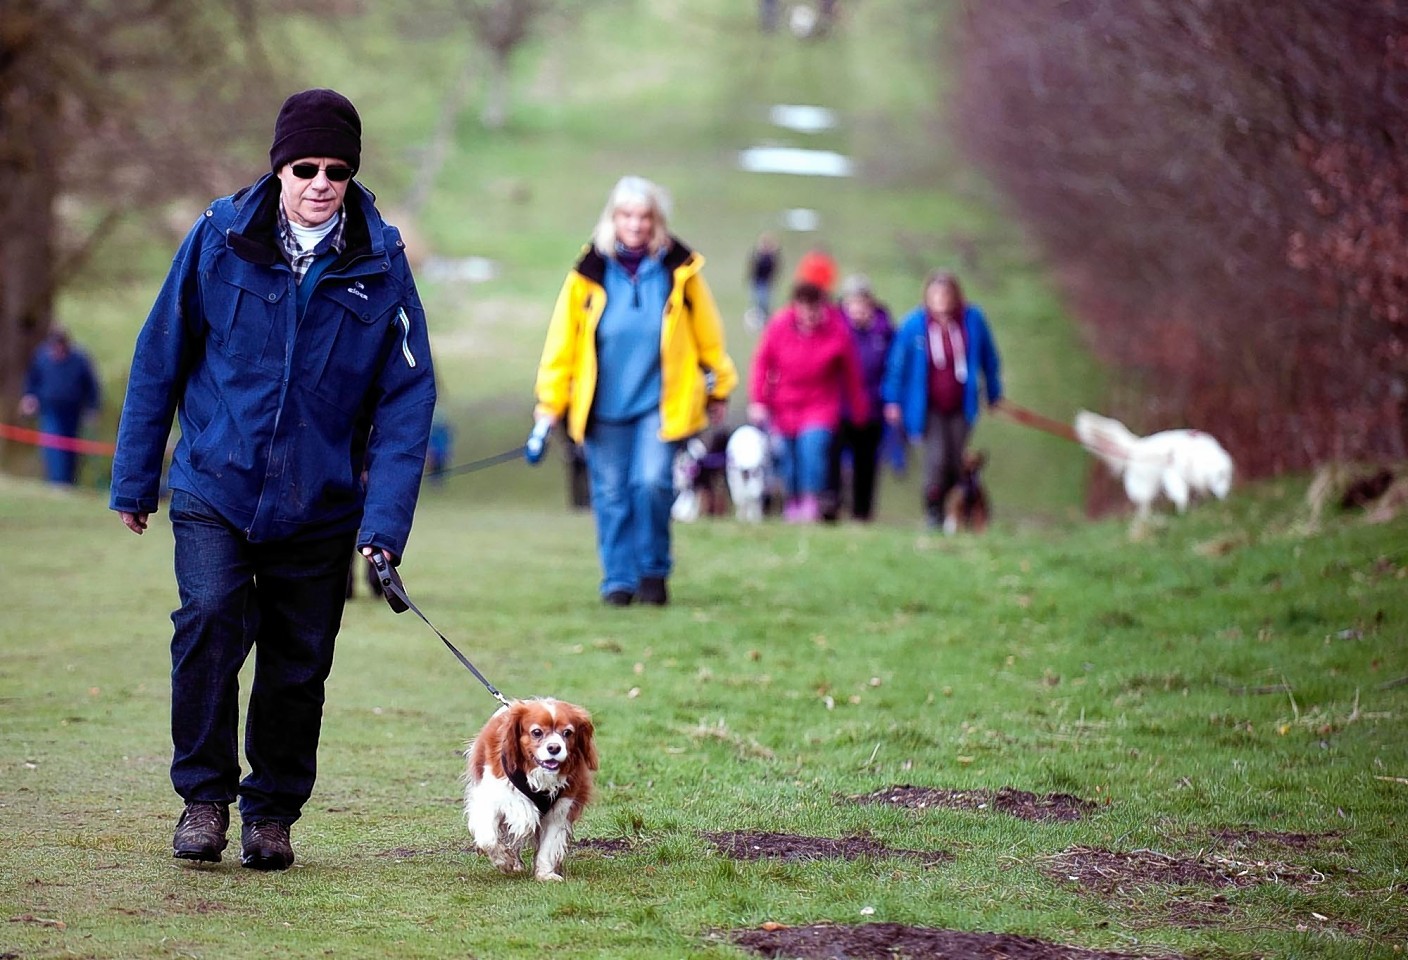 Hearing Dogs for Deaf People’s Great British Dog Walk event